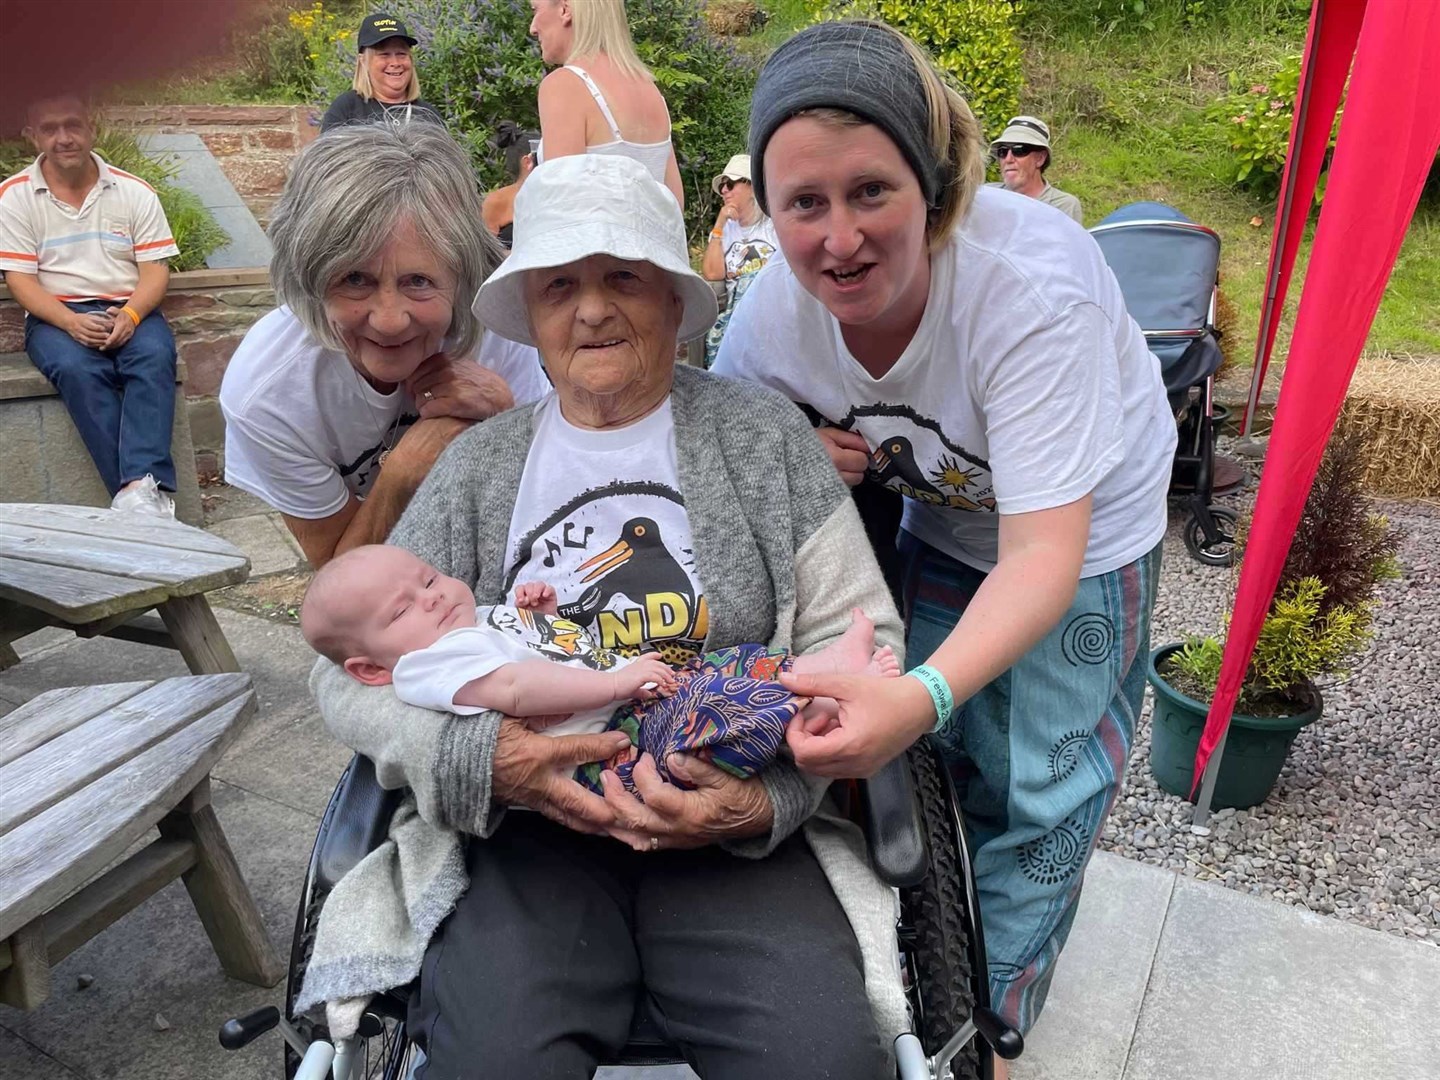 Four generations from one family were present at the Randan Festival, with baby Maisie Oman Foster, just 11 weeks old, Emma Foster, her mother Shirley Duff, and Emma's granny Peggy Oman.